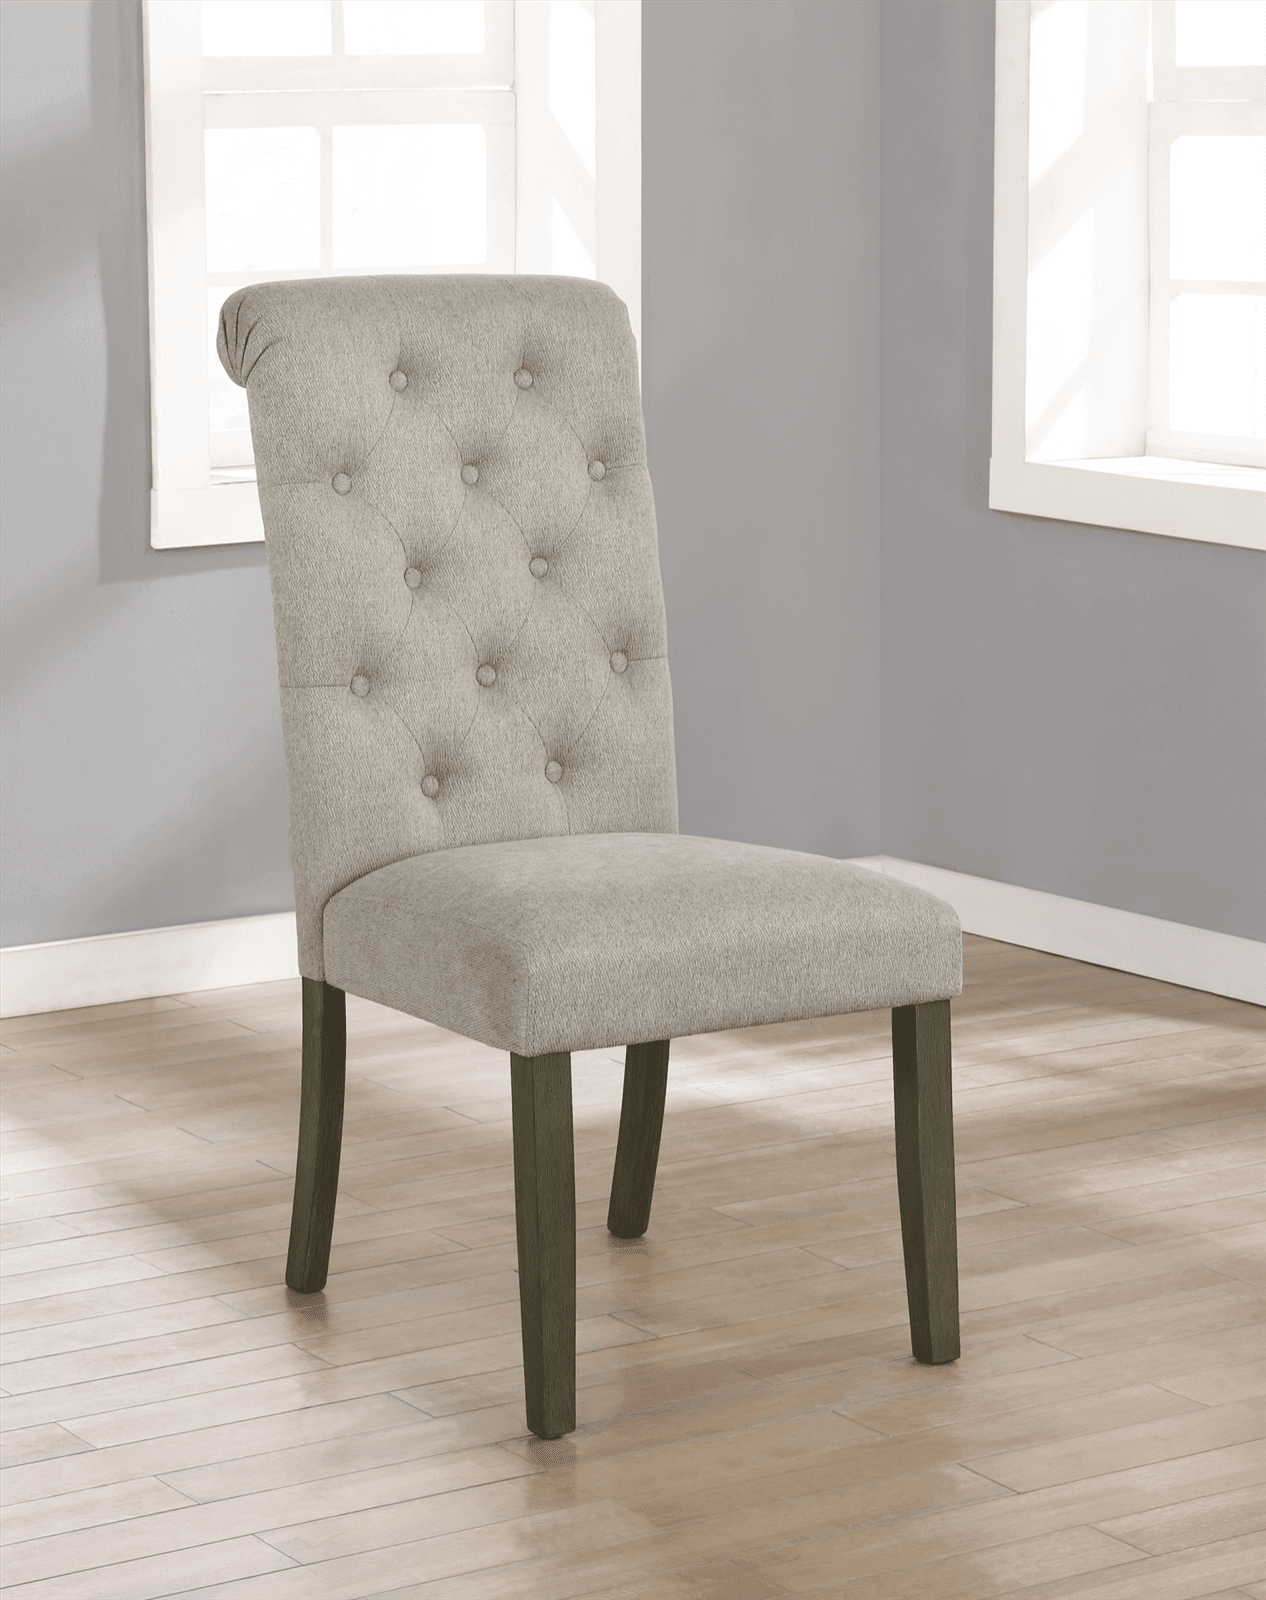 Calandra Tufted Back Side Chairs Rustic Brown And Beige Set Of 2